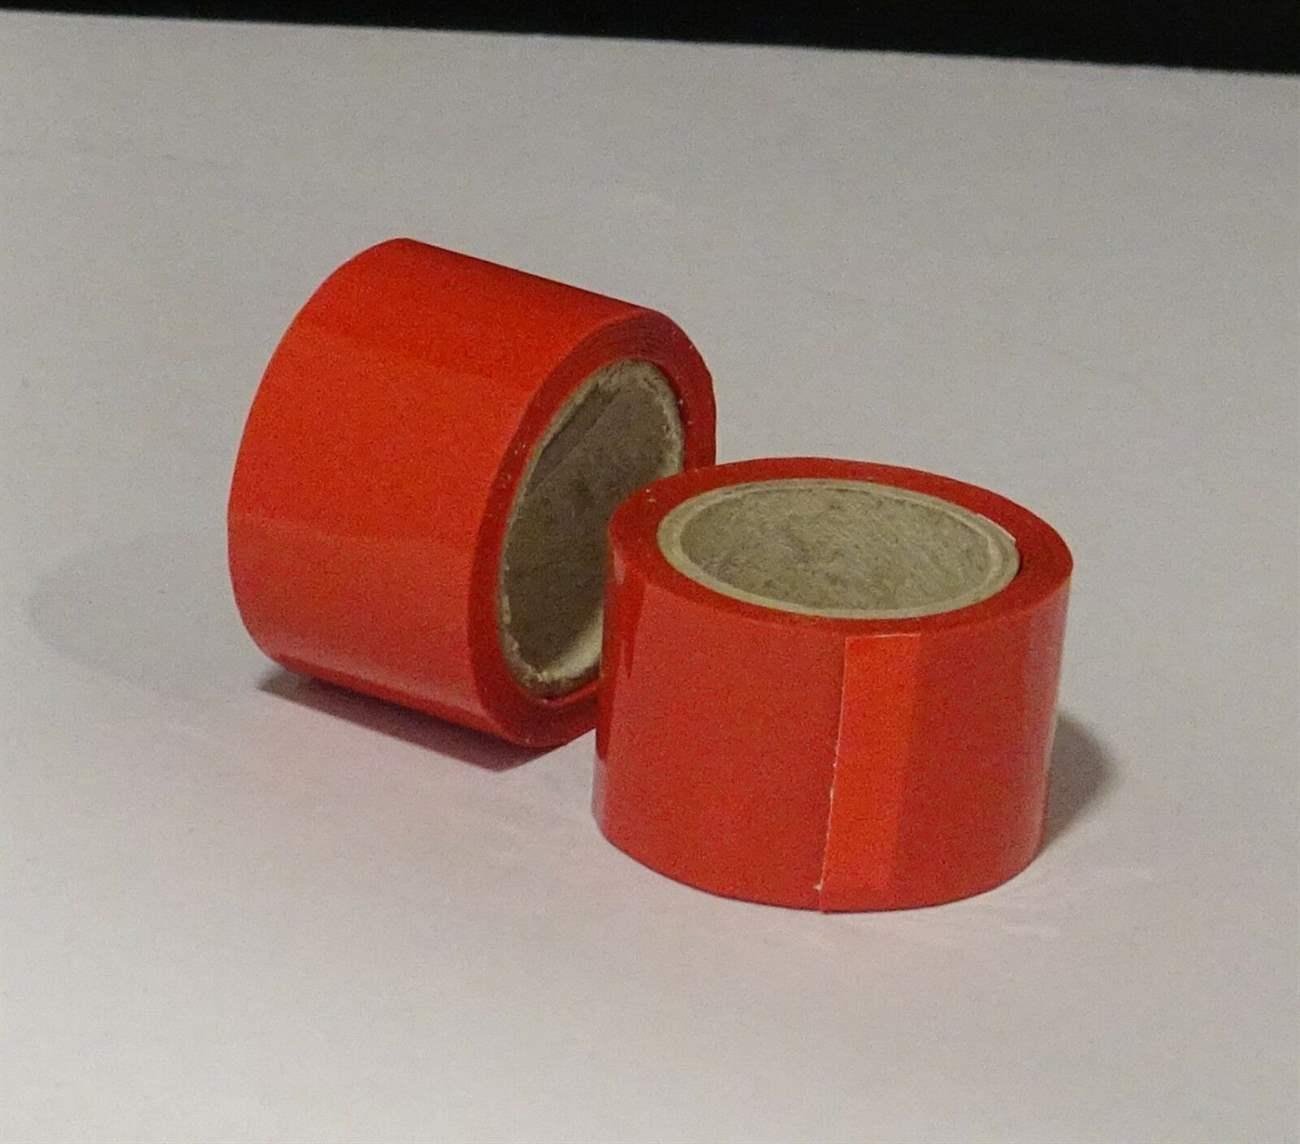 2 x RC Plane Glider medium Red Wing Repair & Cover Tape Strength Colour